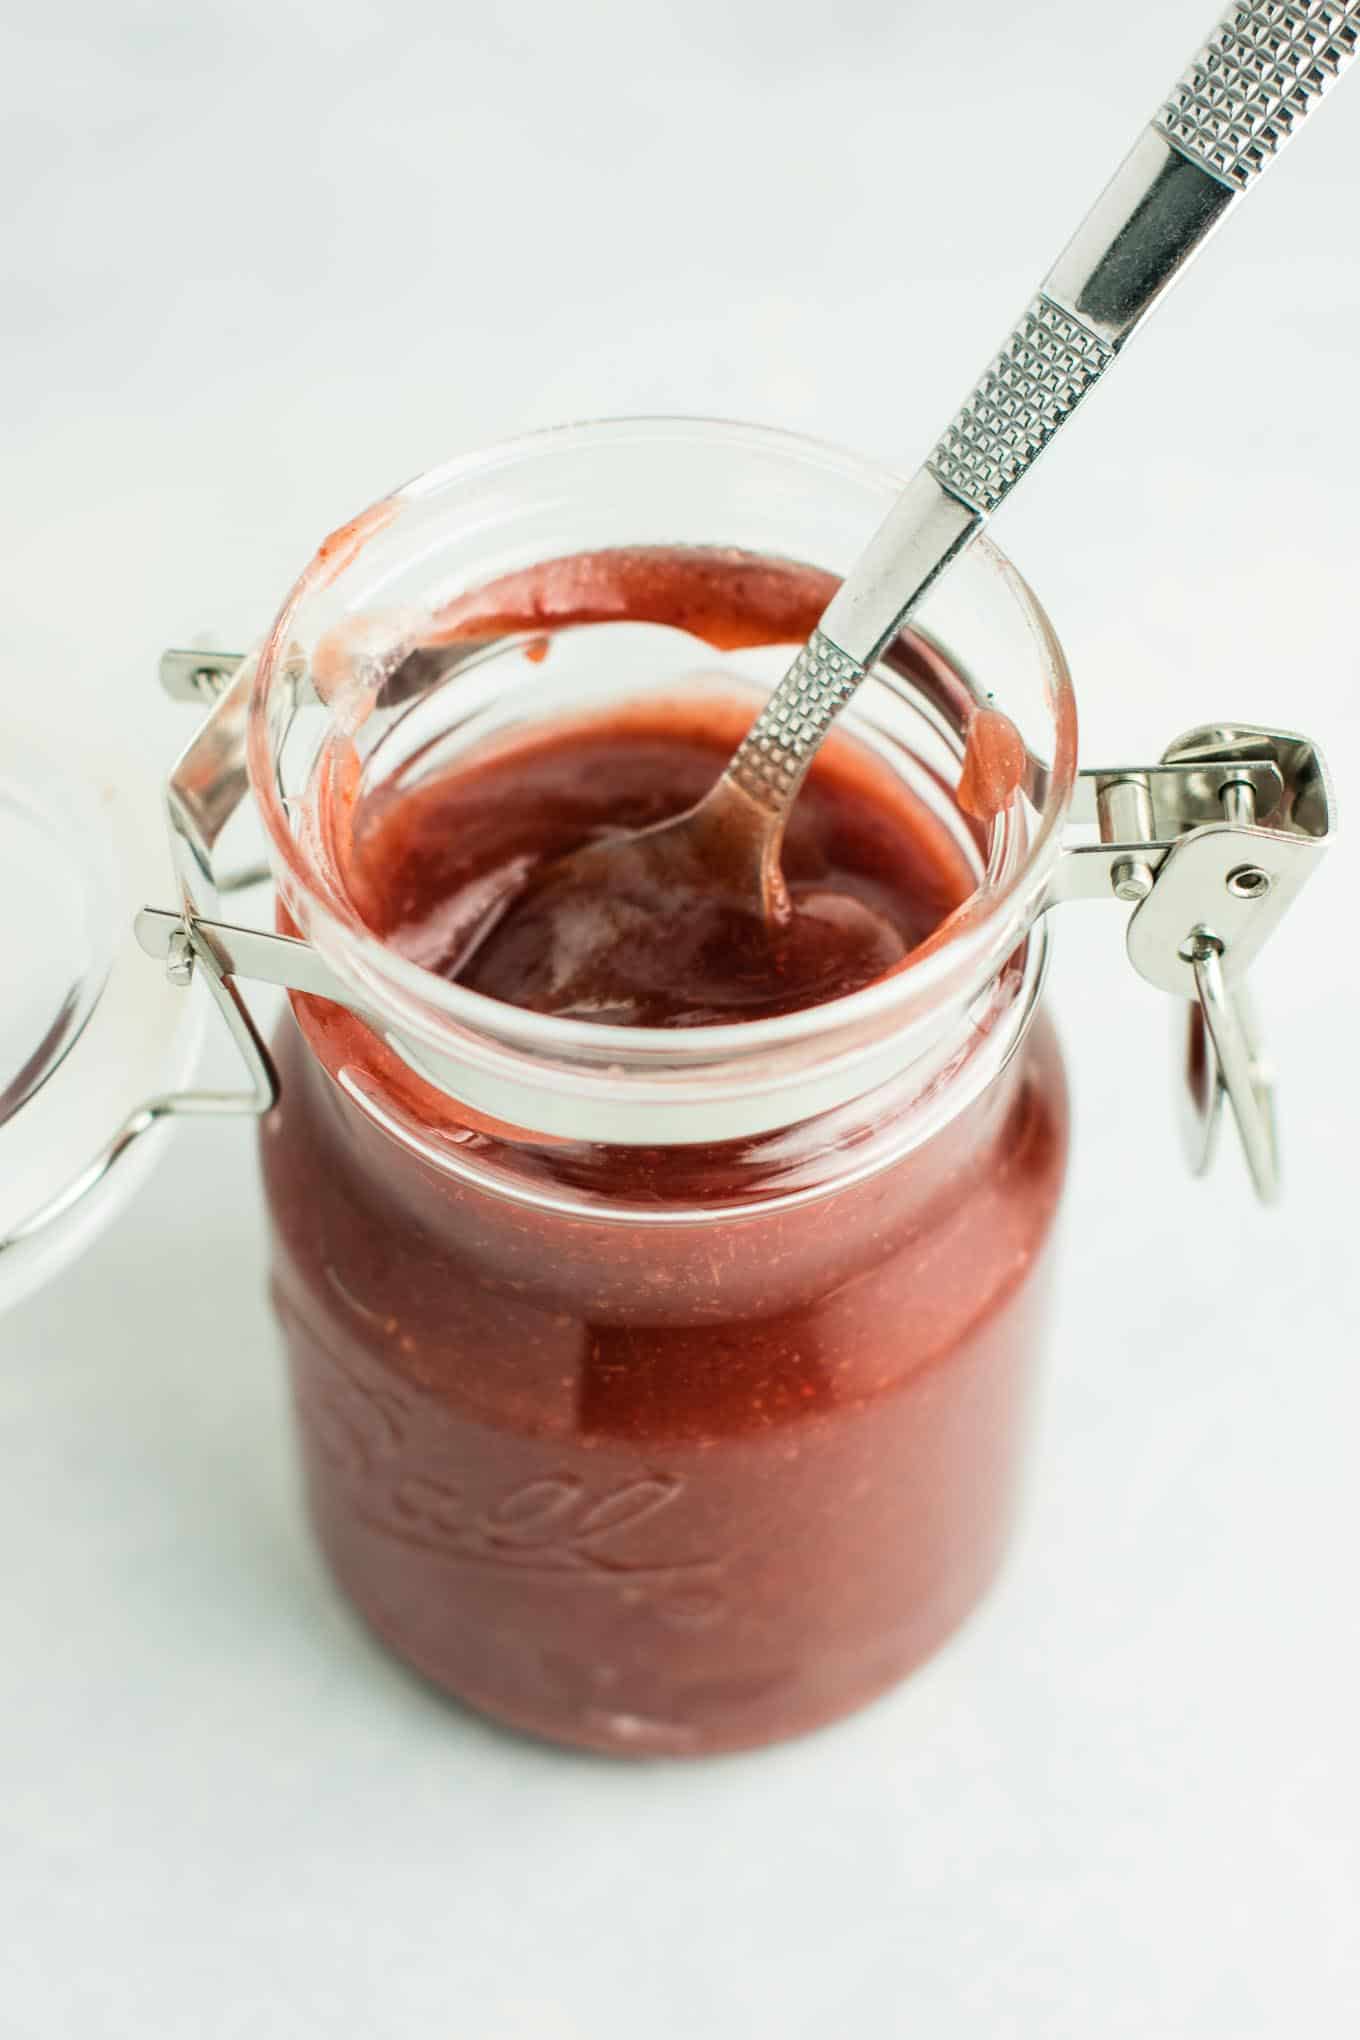 Slow Cooker Cranberry Apple Butter recipe made with just 4 ingredients. Your house will smell amazing while this cooks! (vegan, gluten free, naturally sweetened) #cranberryapplebutter #slowcooker #crockpot #vegan #glutenfree 